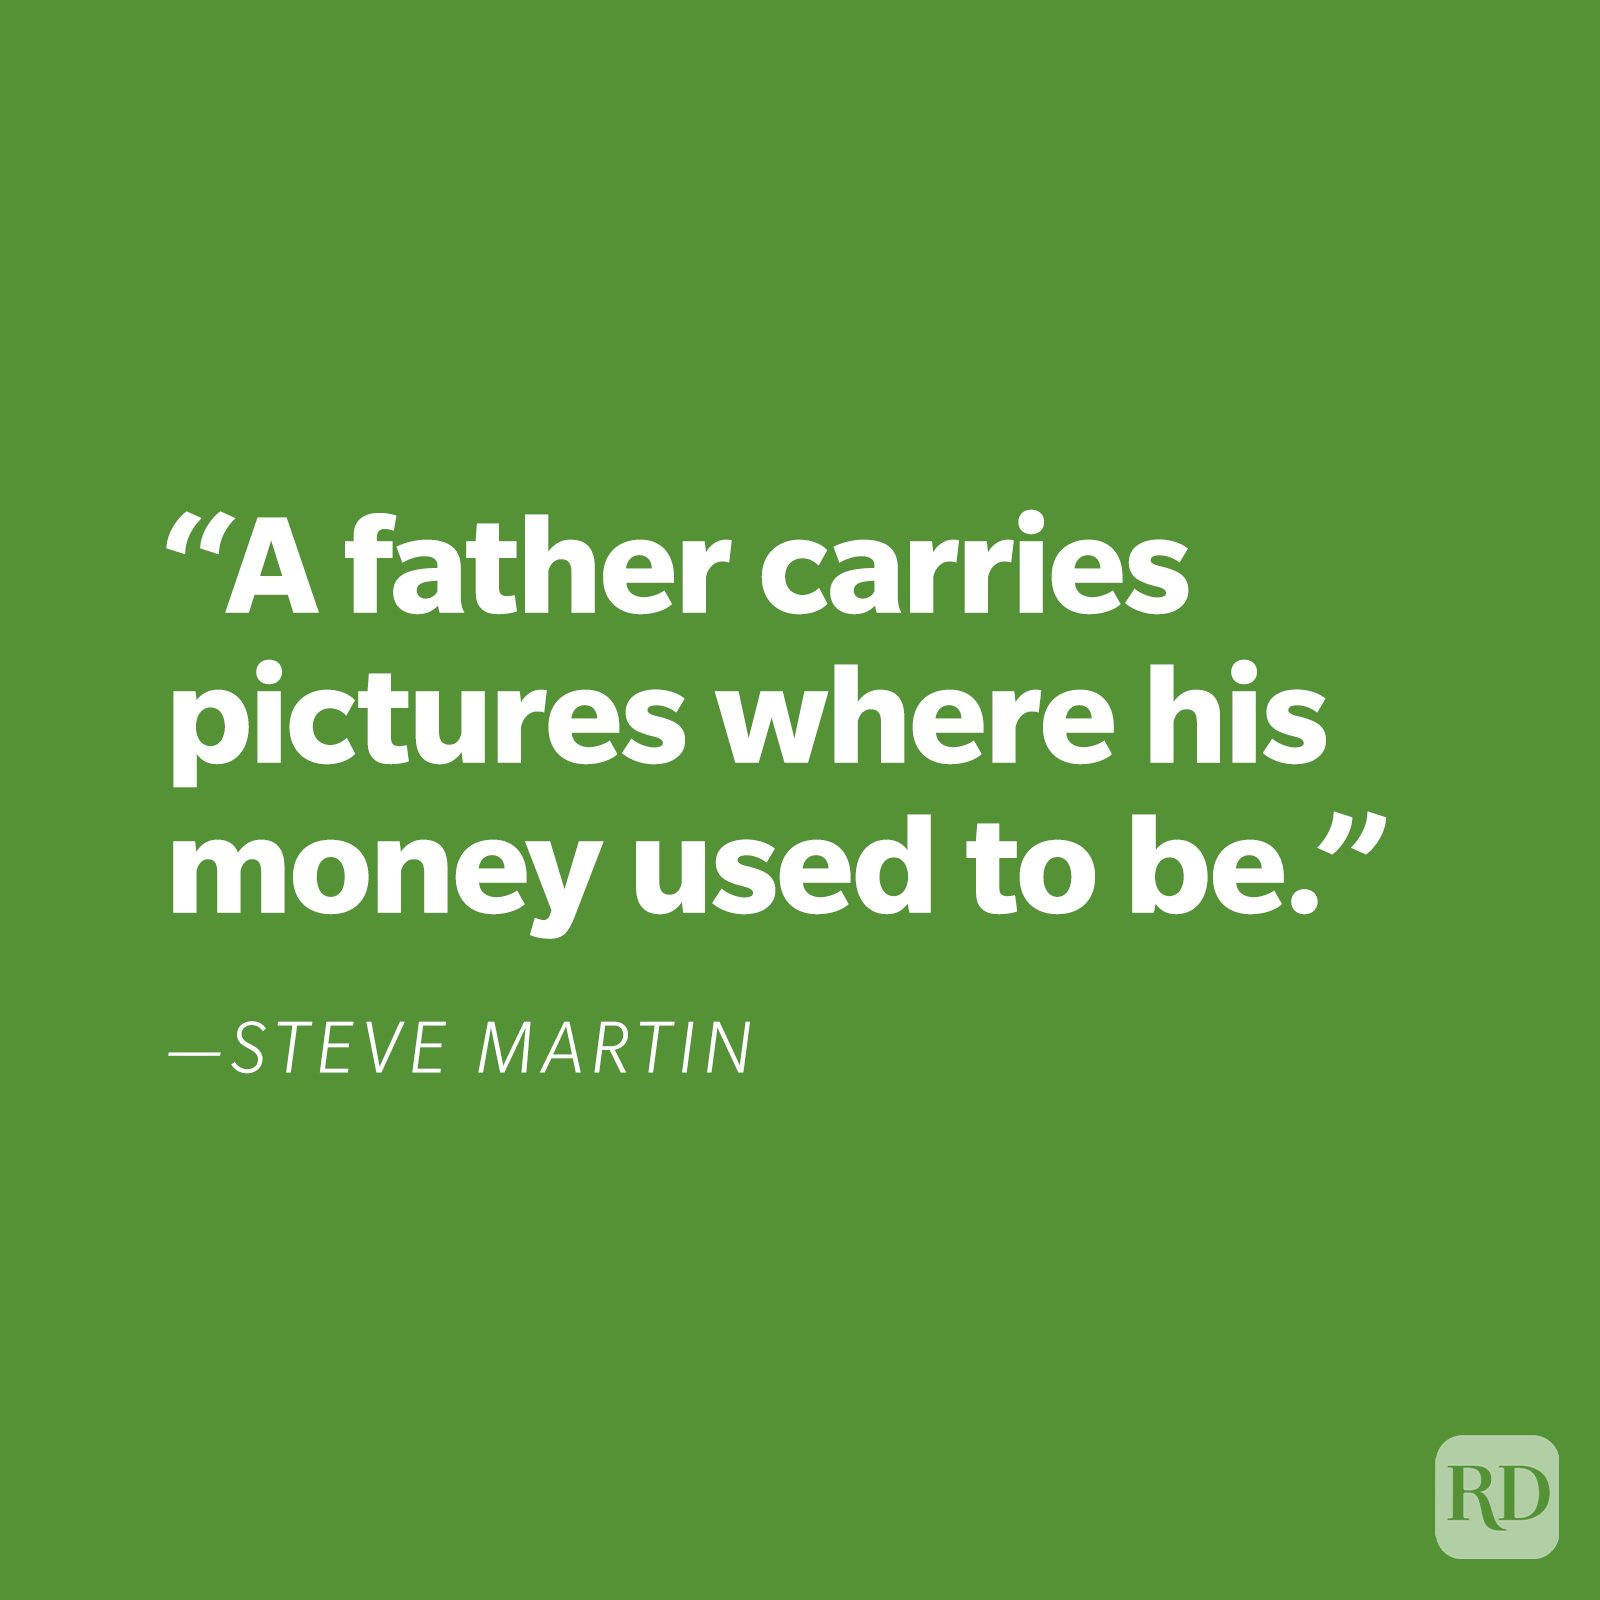 "A father carries pictures where his money used to be." —Steve Martin